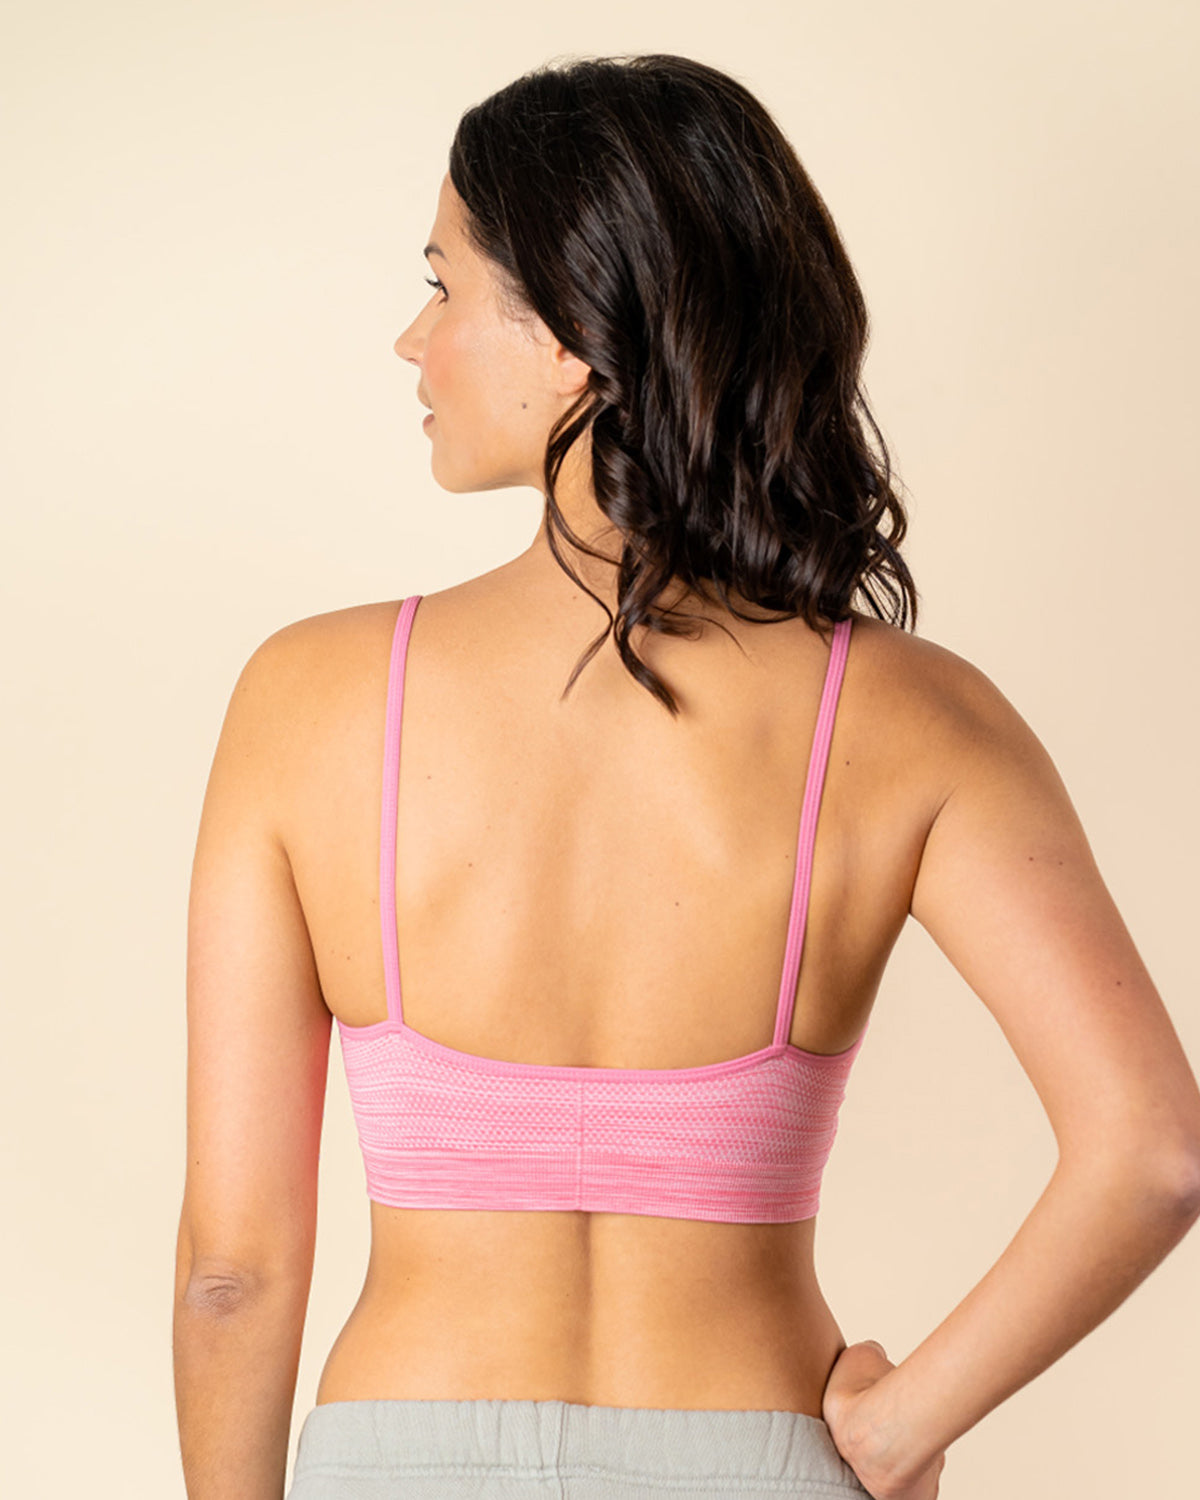 Tips and Tricks for Finding the Perfect H-Cup Bras